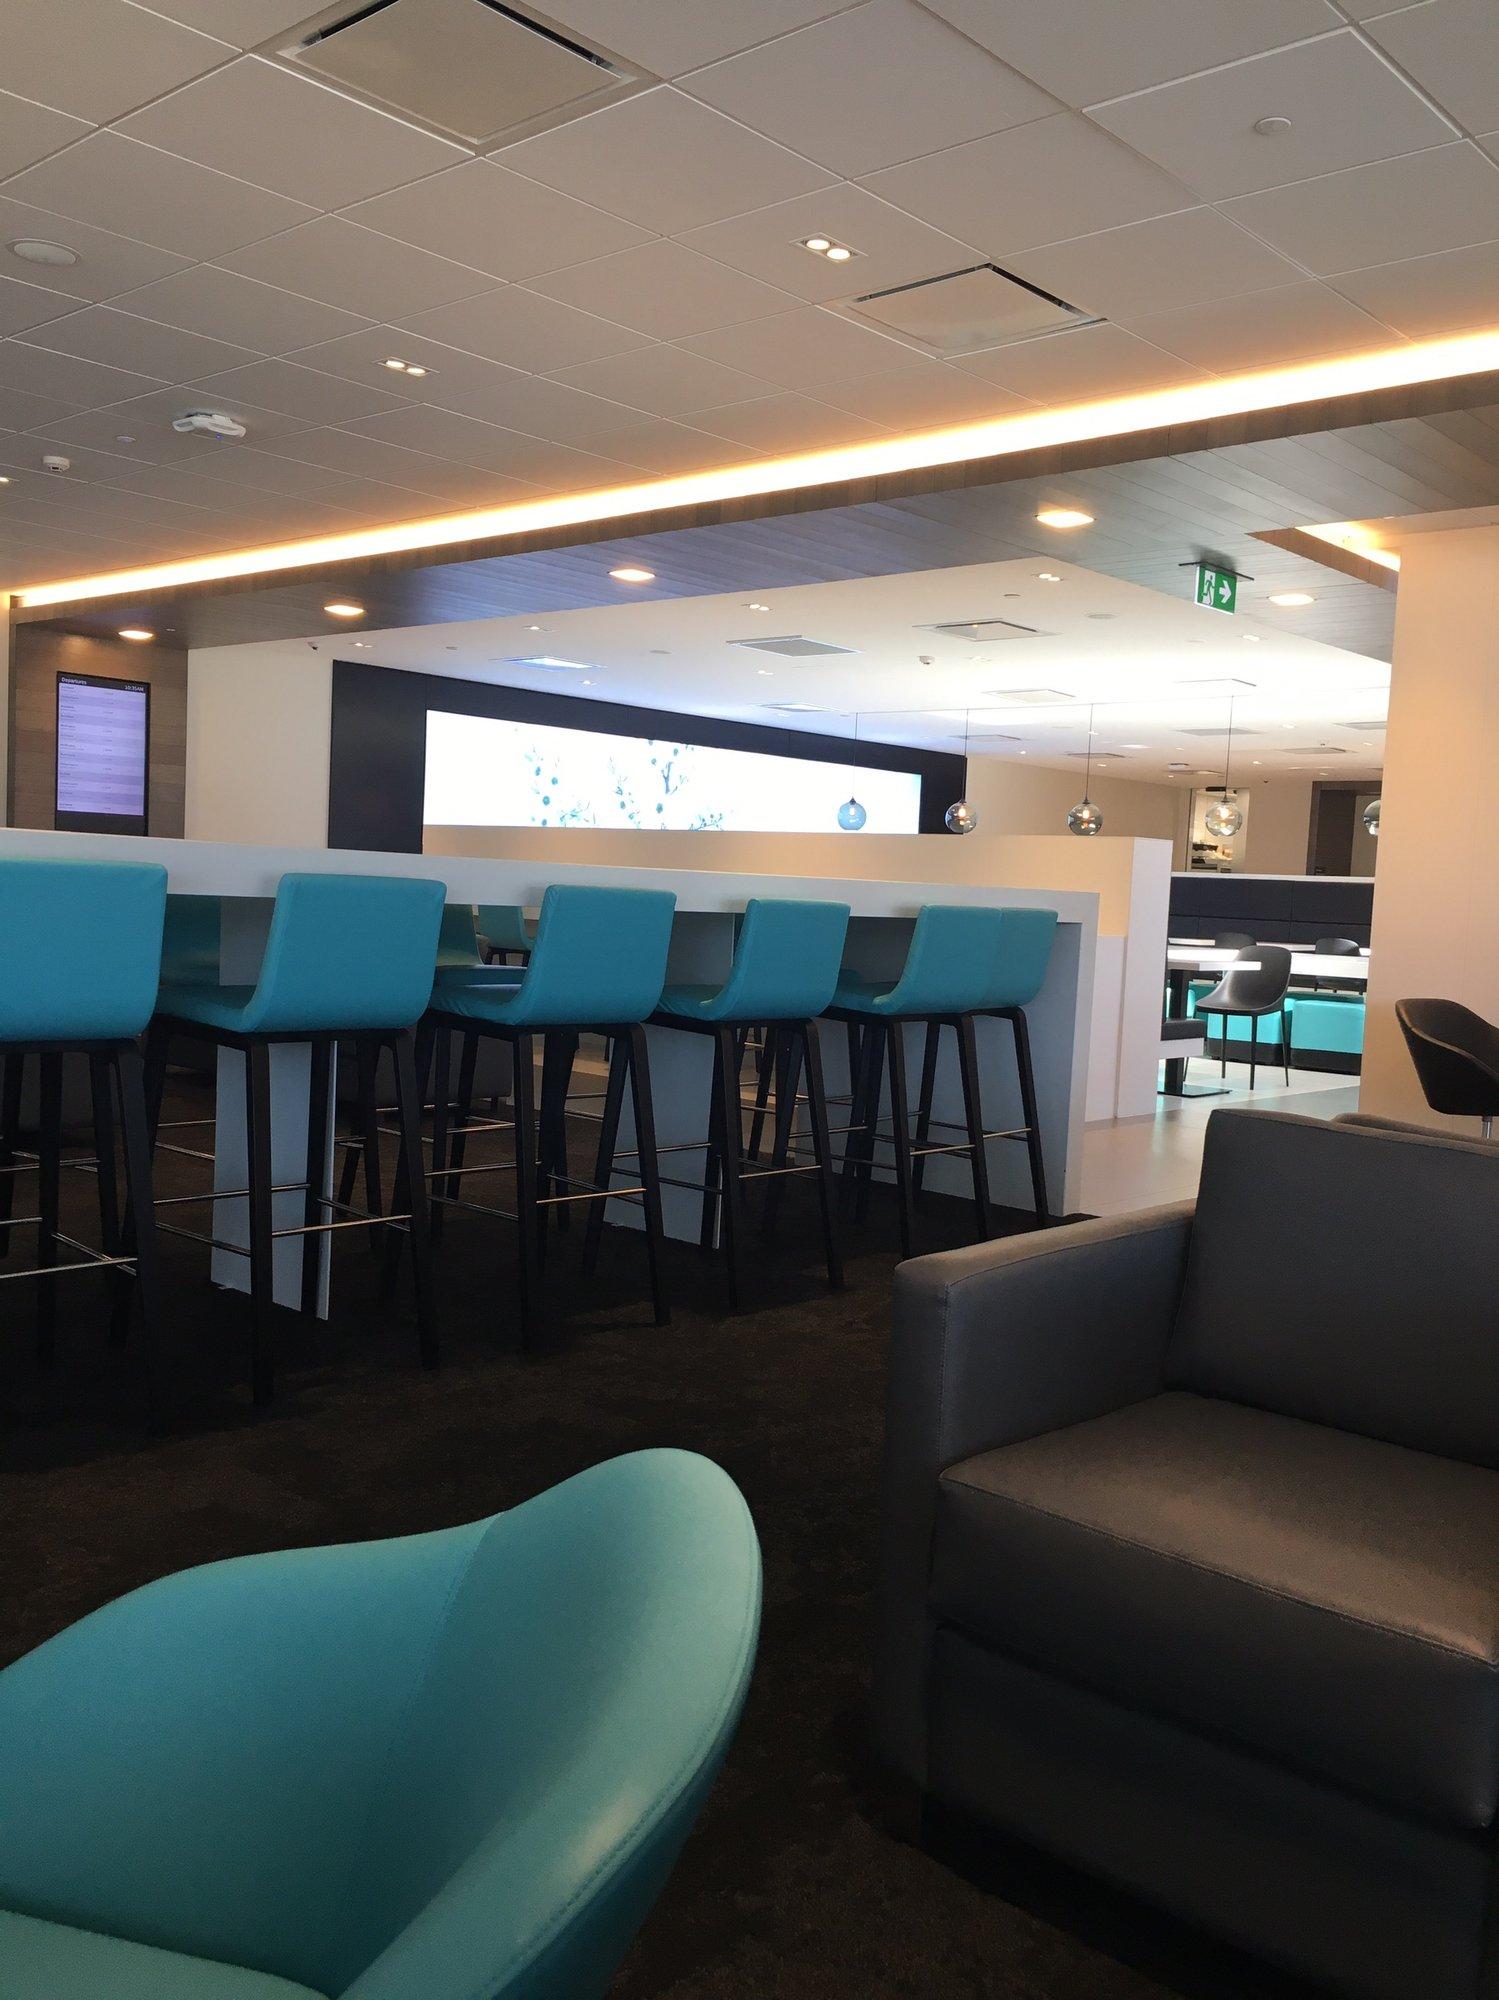 Air New Zealand Regional Lounge image 3 of 7